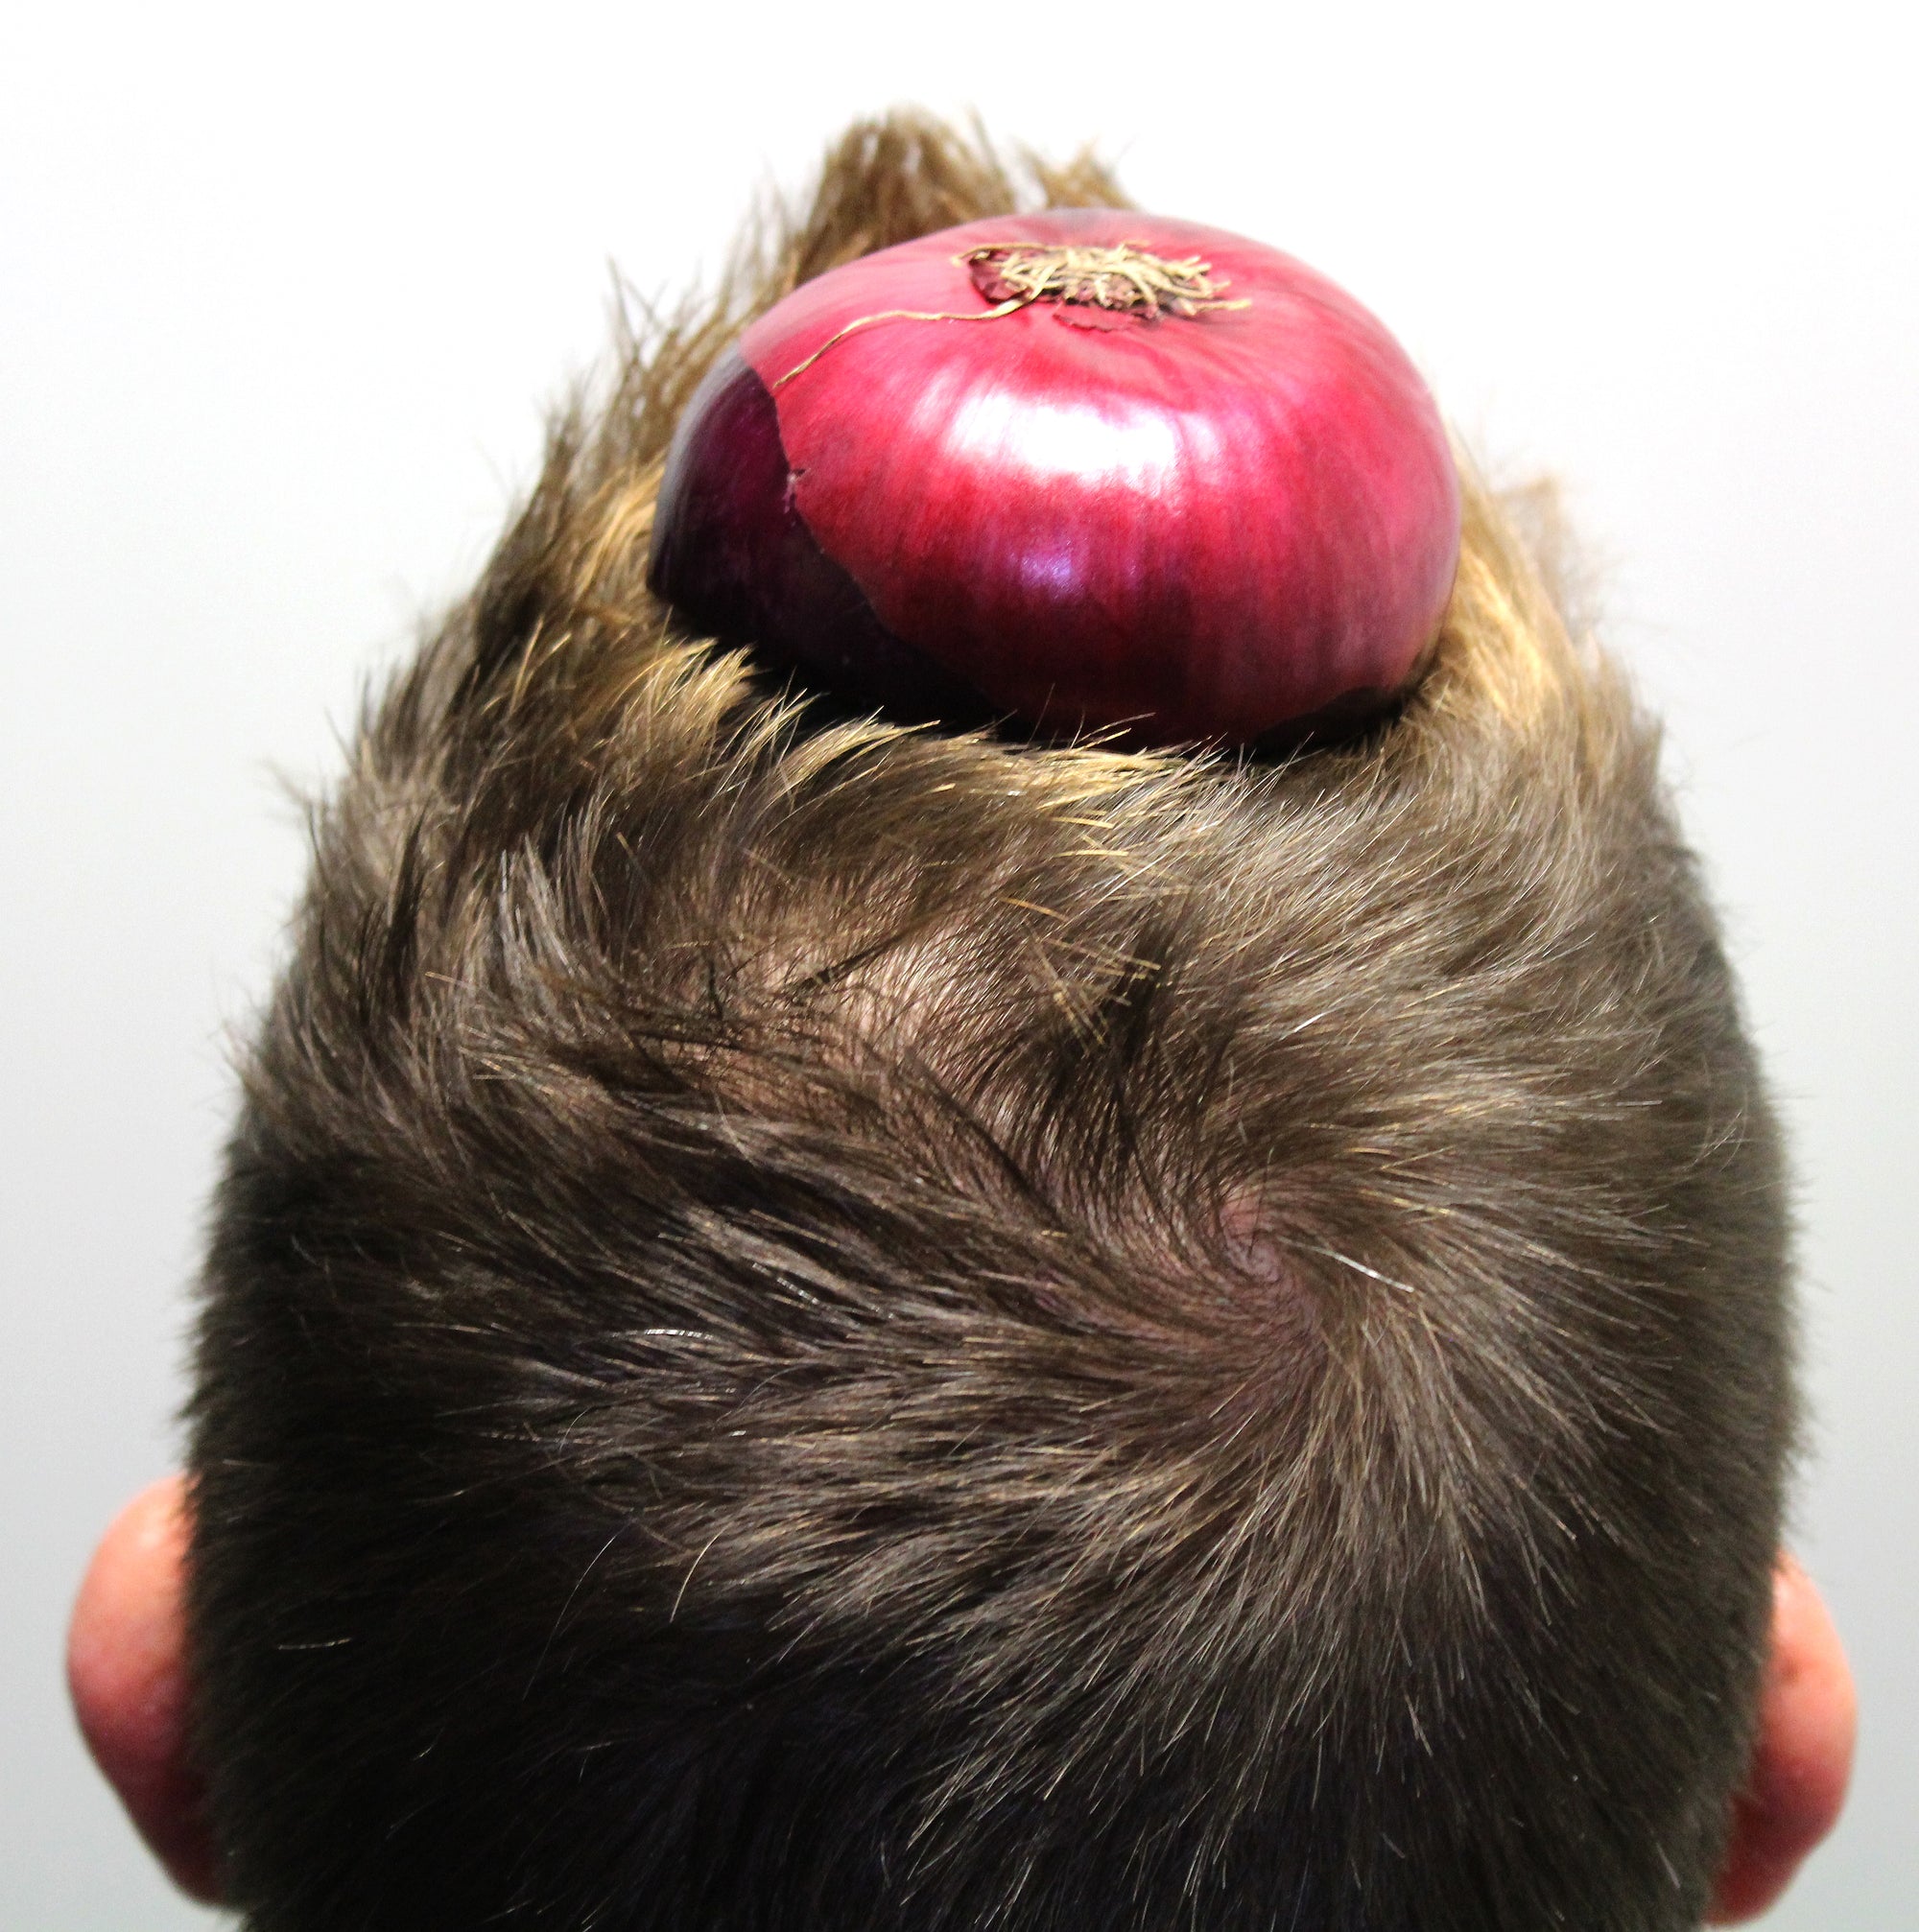 Is Onion Juice a hair growth remedy?